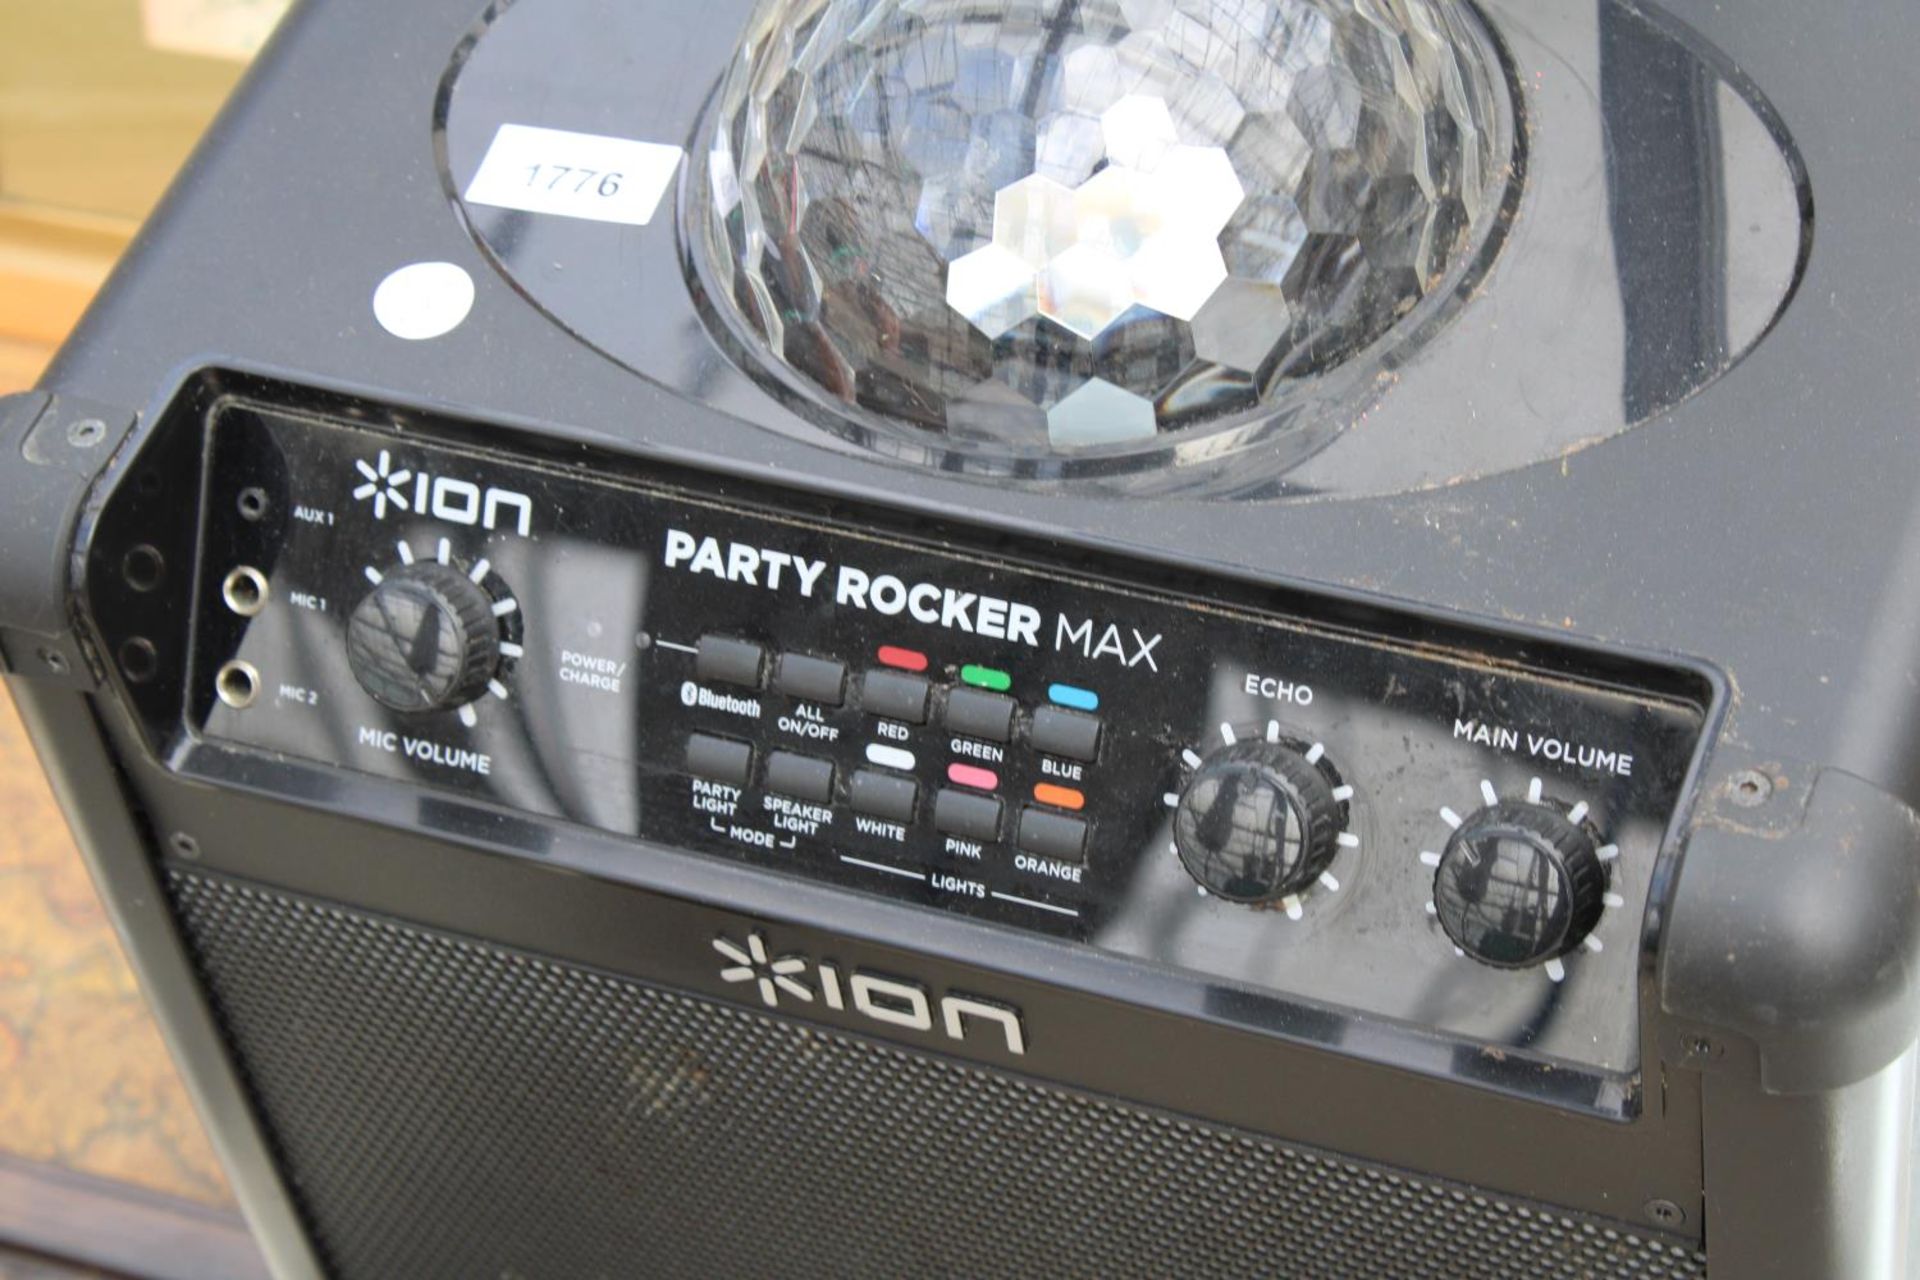 AN ION PARTY ROCKER MAX SPEAKER AND DISCO LIGHT - Image 2 of 3